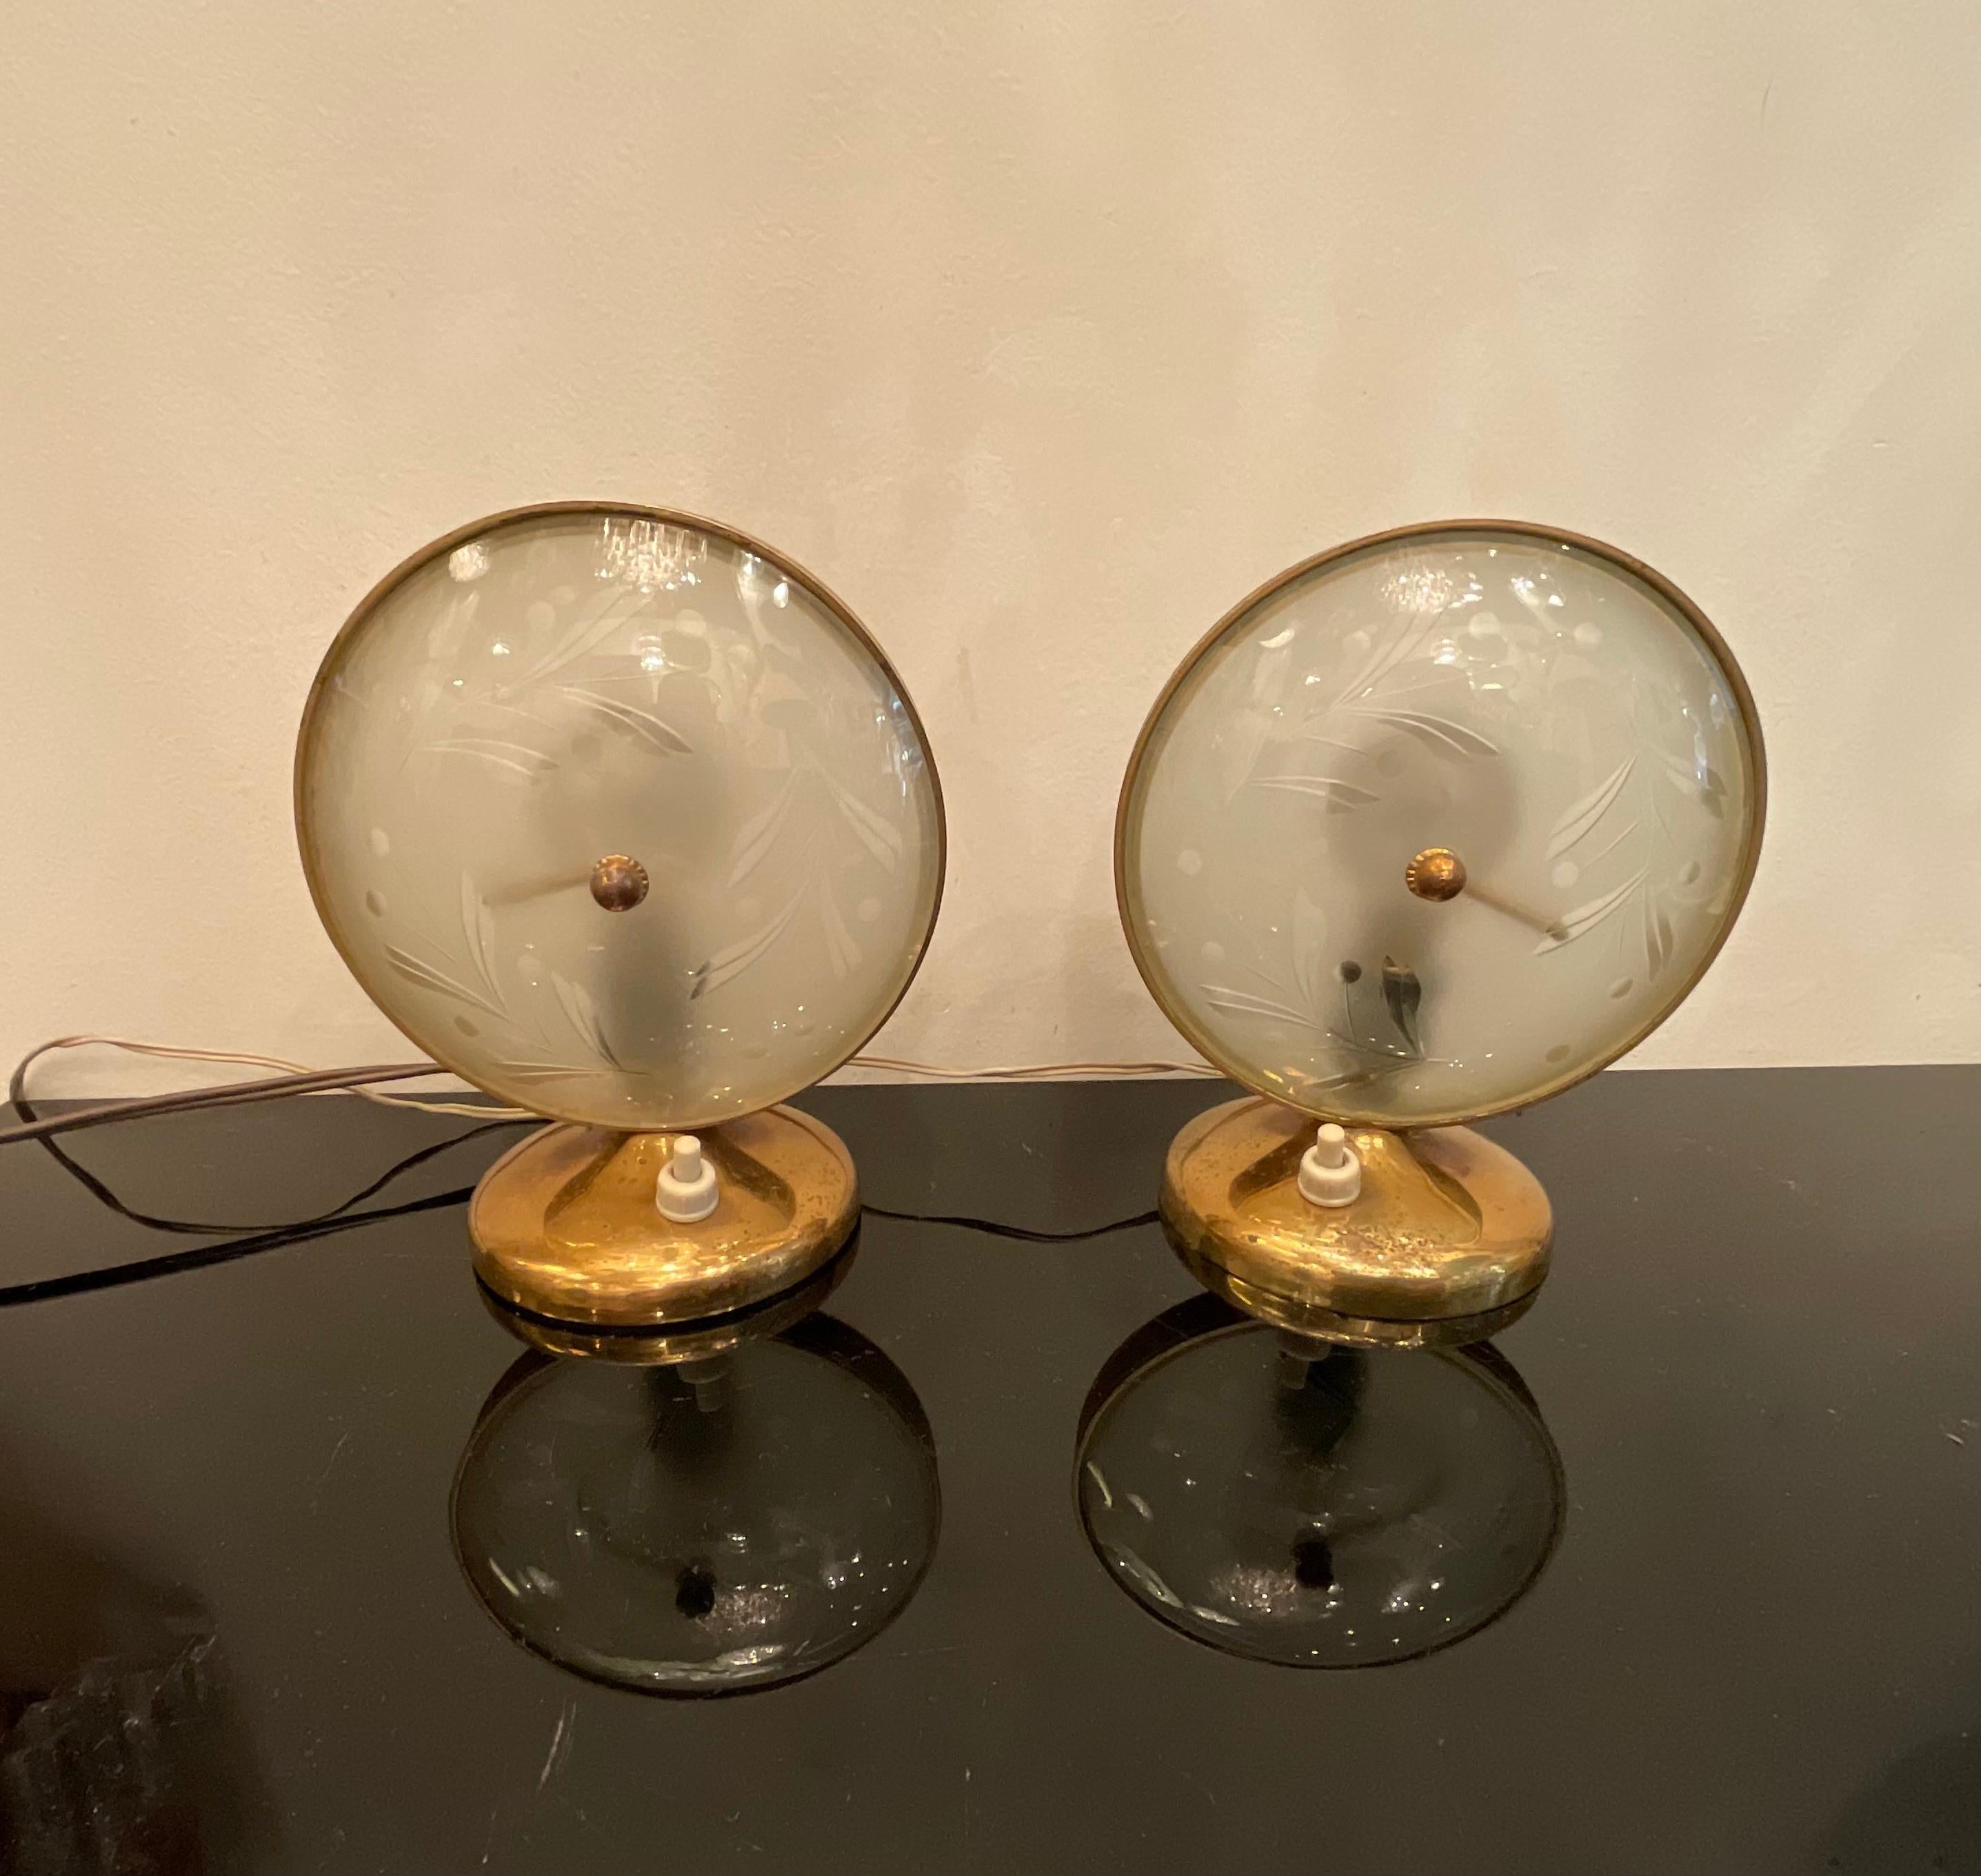 FONTANARTE - Pietro Chiesa - Pair of lamps 1950s For Sale 4